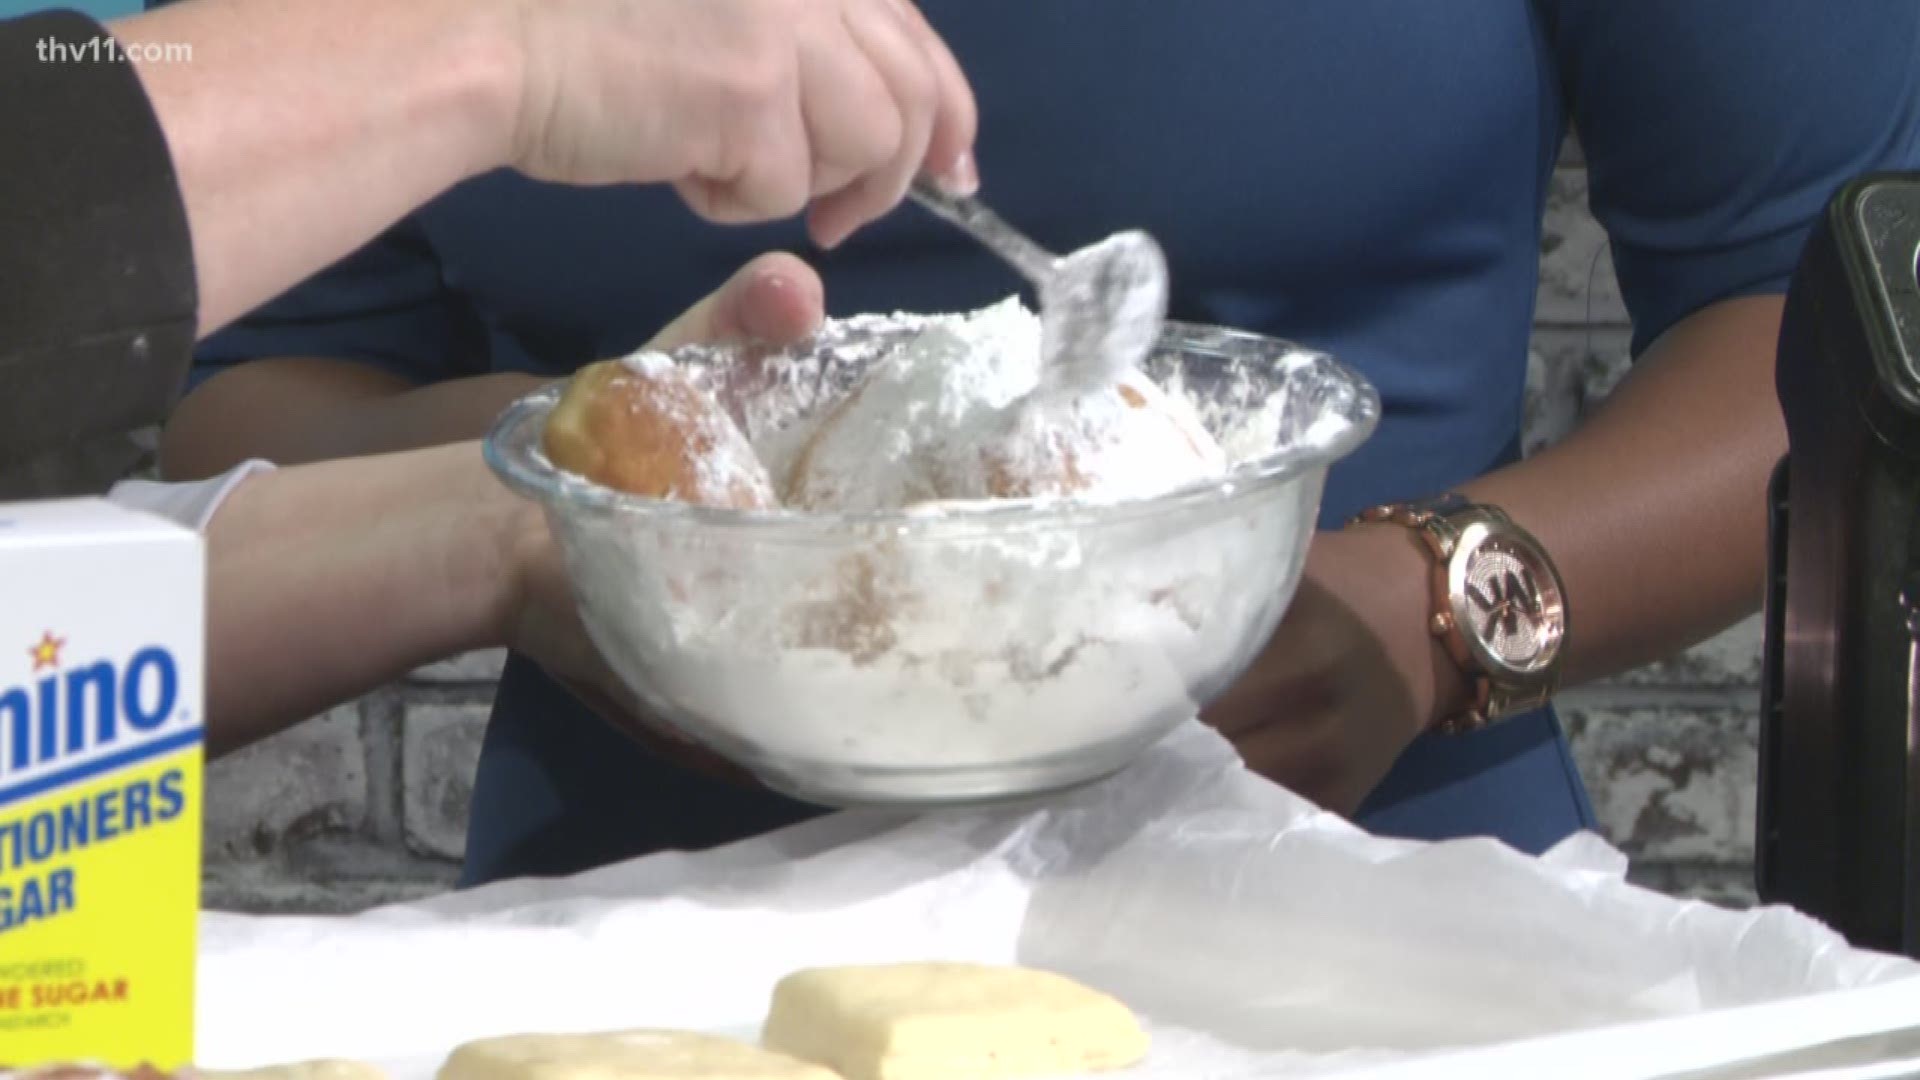 We look at how to make some beignets for Mardi Gras.